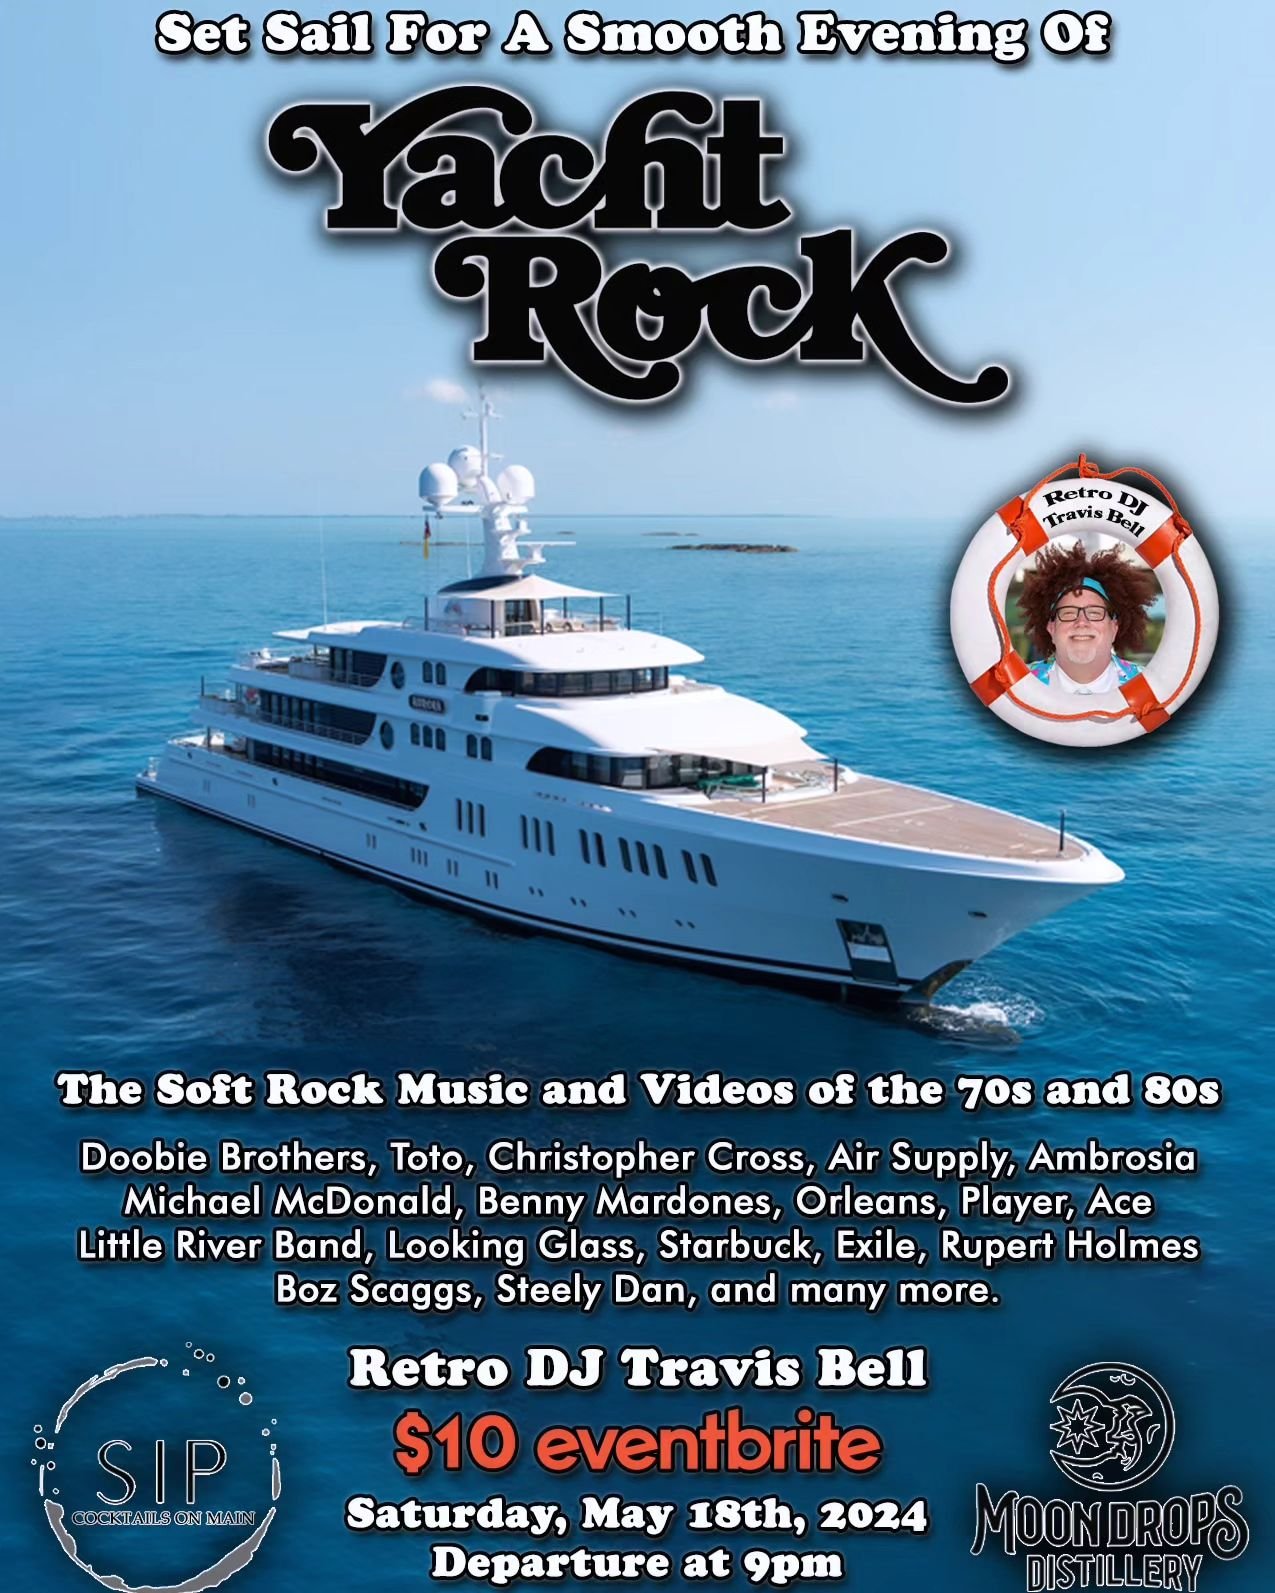 GRAB YOUR CAPTAINS HAT

put on those deck shoes, and join us for a yacht rock adventure you won't forget! 

Saturday, May 18th

Doors open at 8PM. 
@retrodiscjockey sets sail at 9PM.

Tickets are $10! 

Link to tickets in Bio